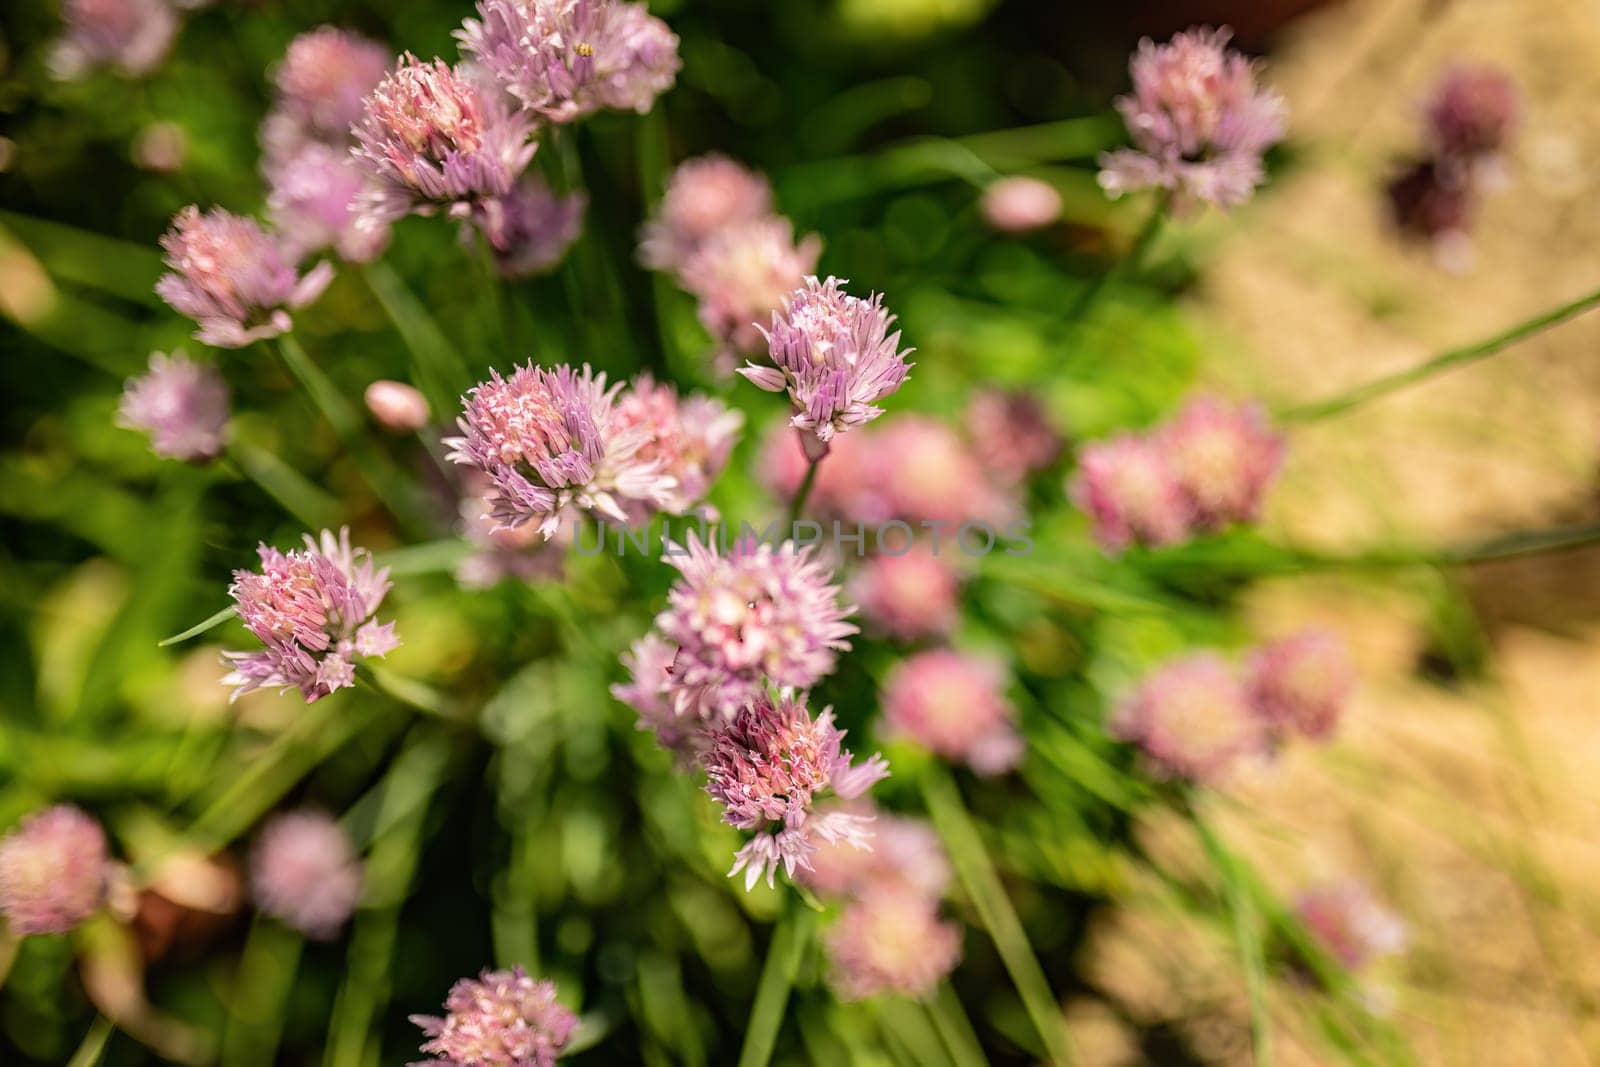 Chive Flower in Nature by pippocarlot